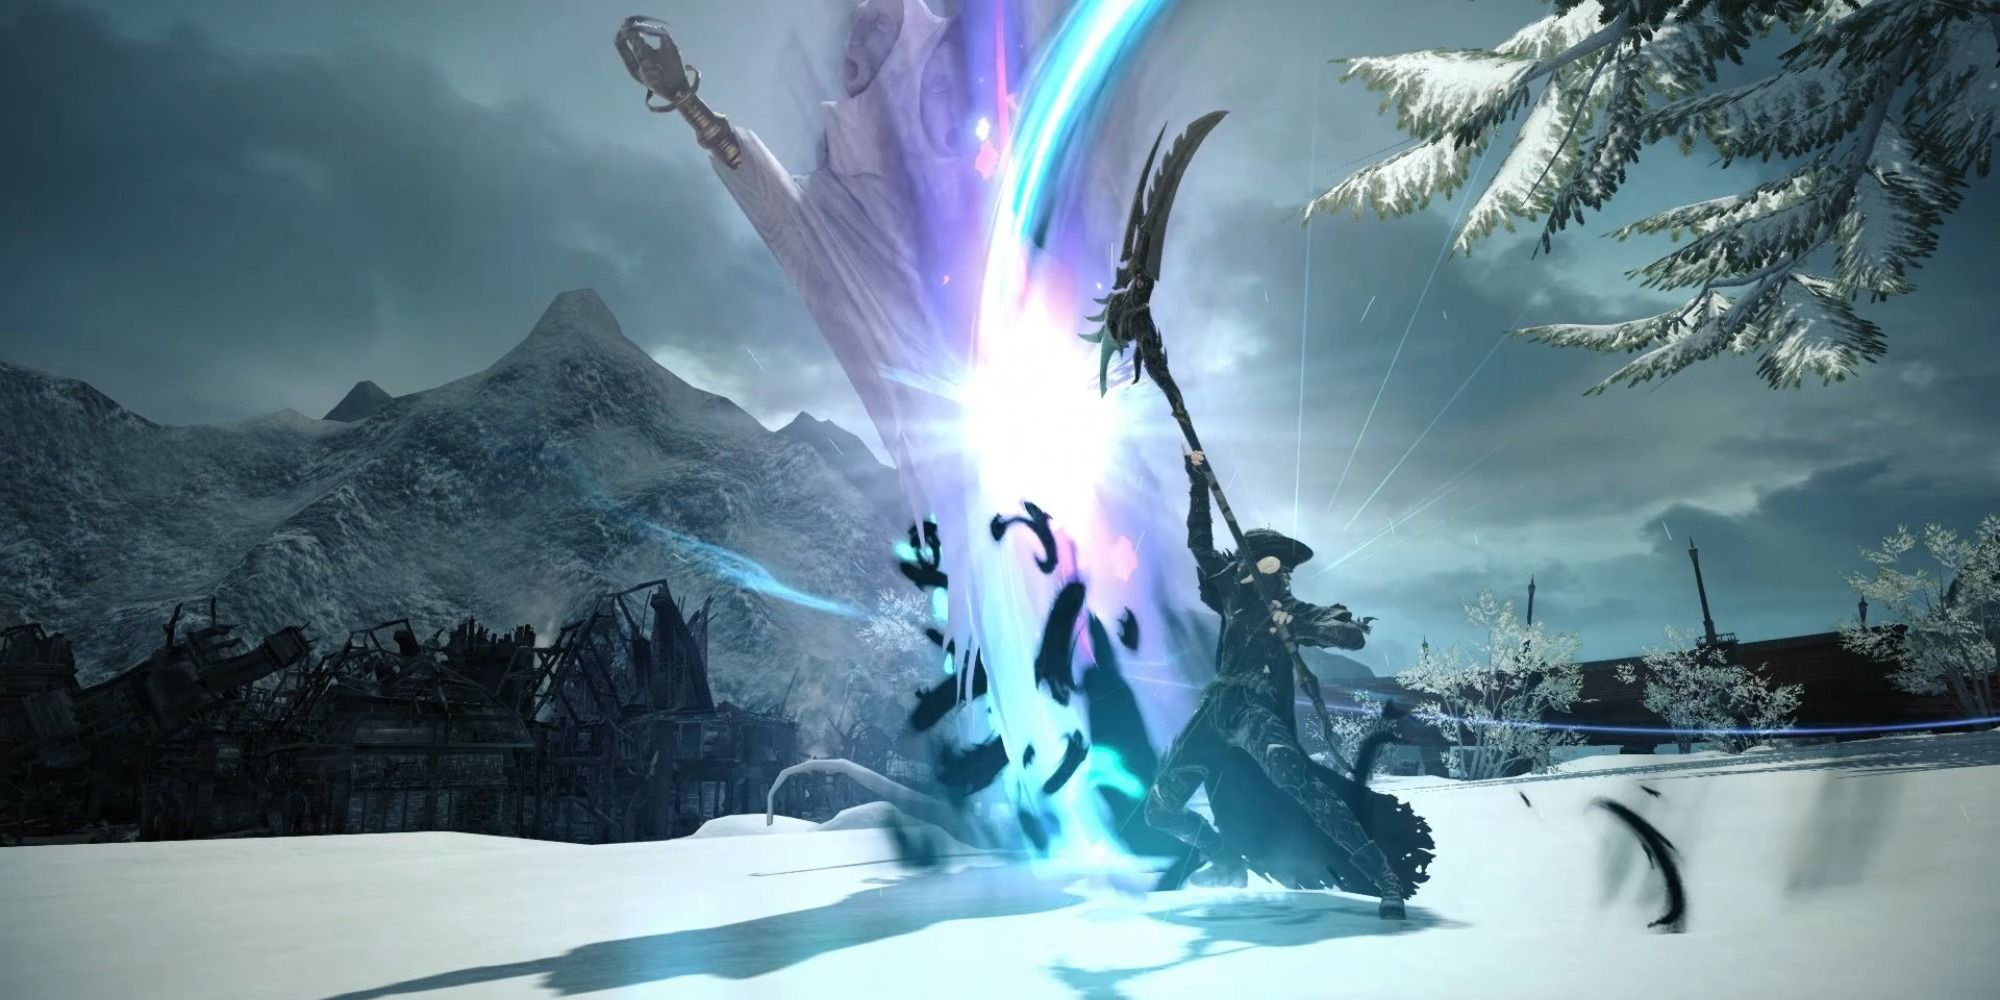 The Reaper Job attacking an enemy with its scythe in Final Fantasy 14: Endwalker.